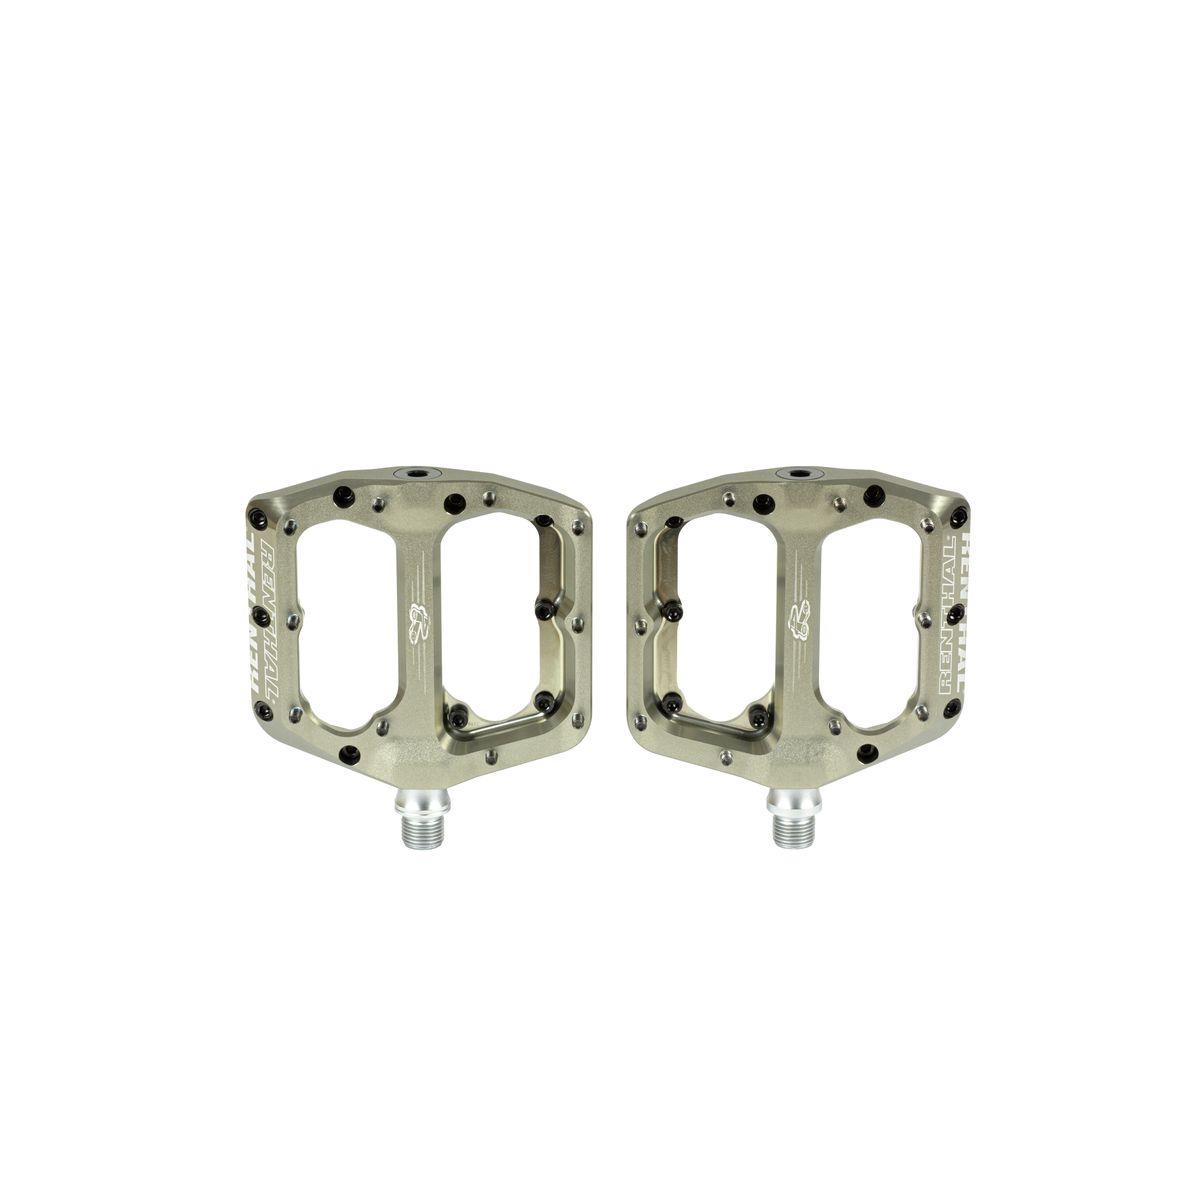 Pair of Revo-F AluGold Flat Pedals